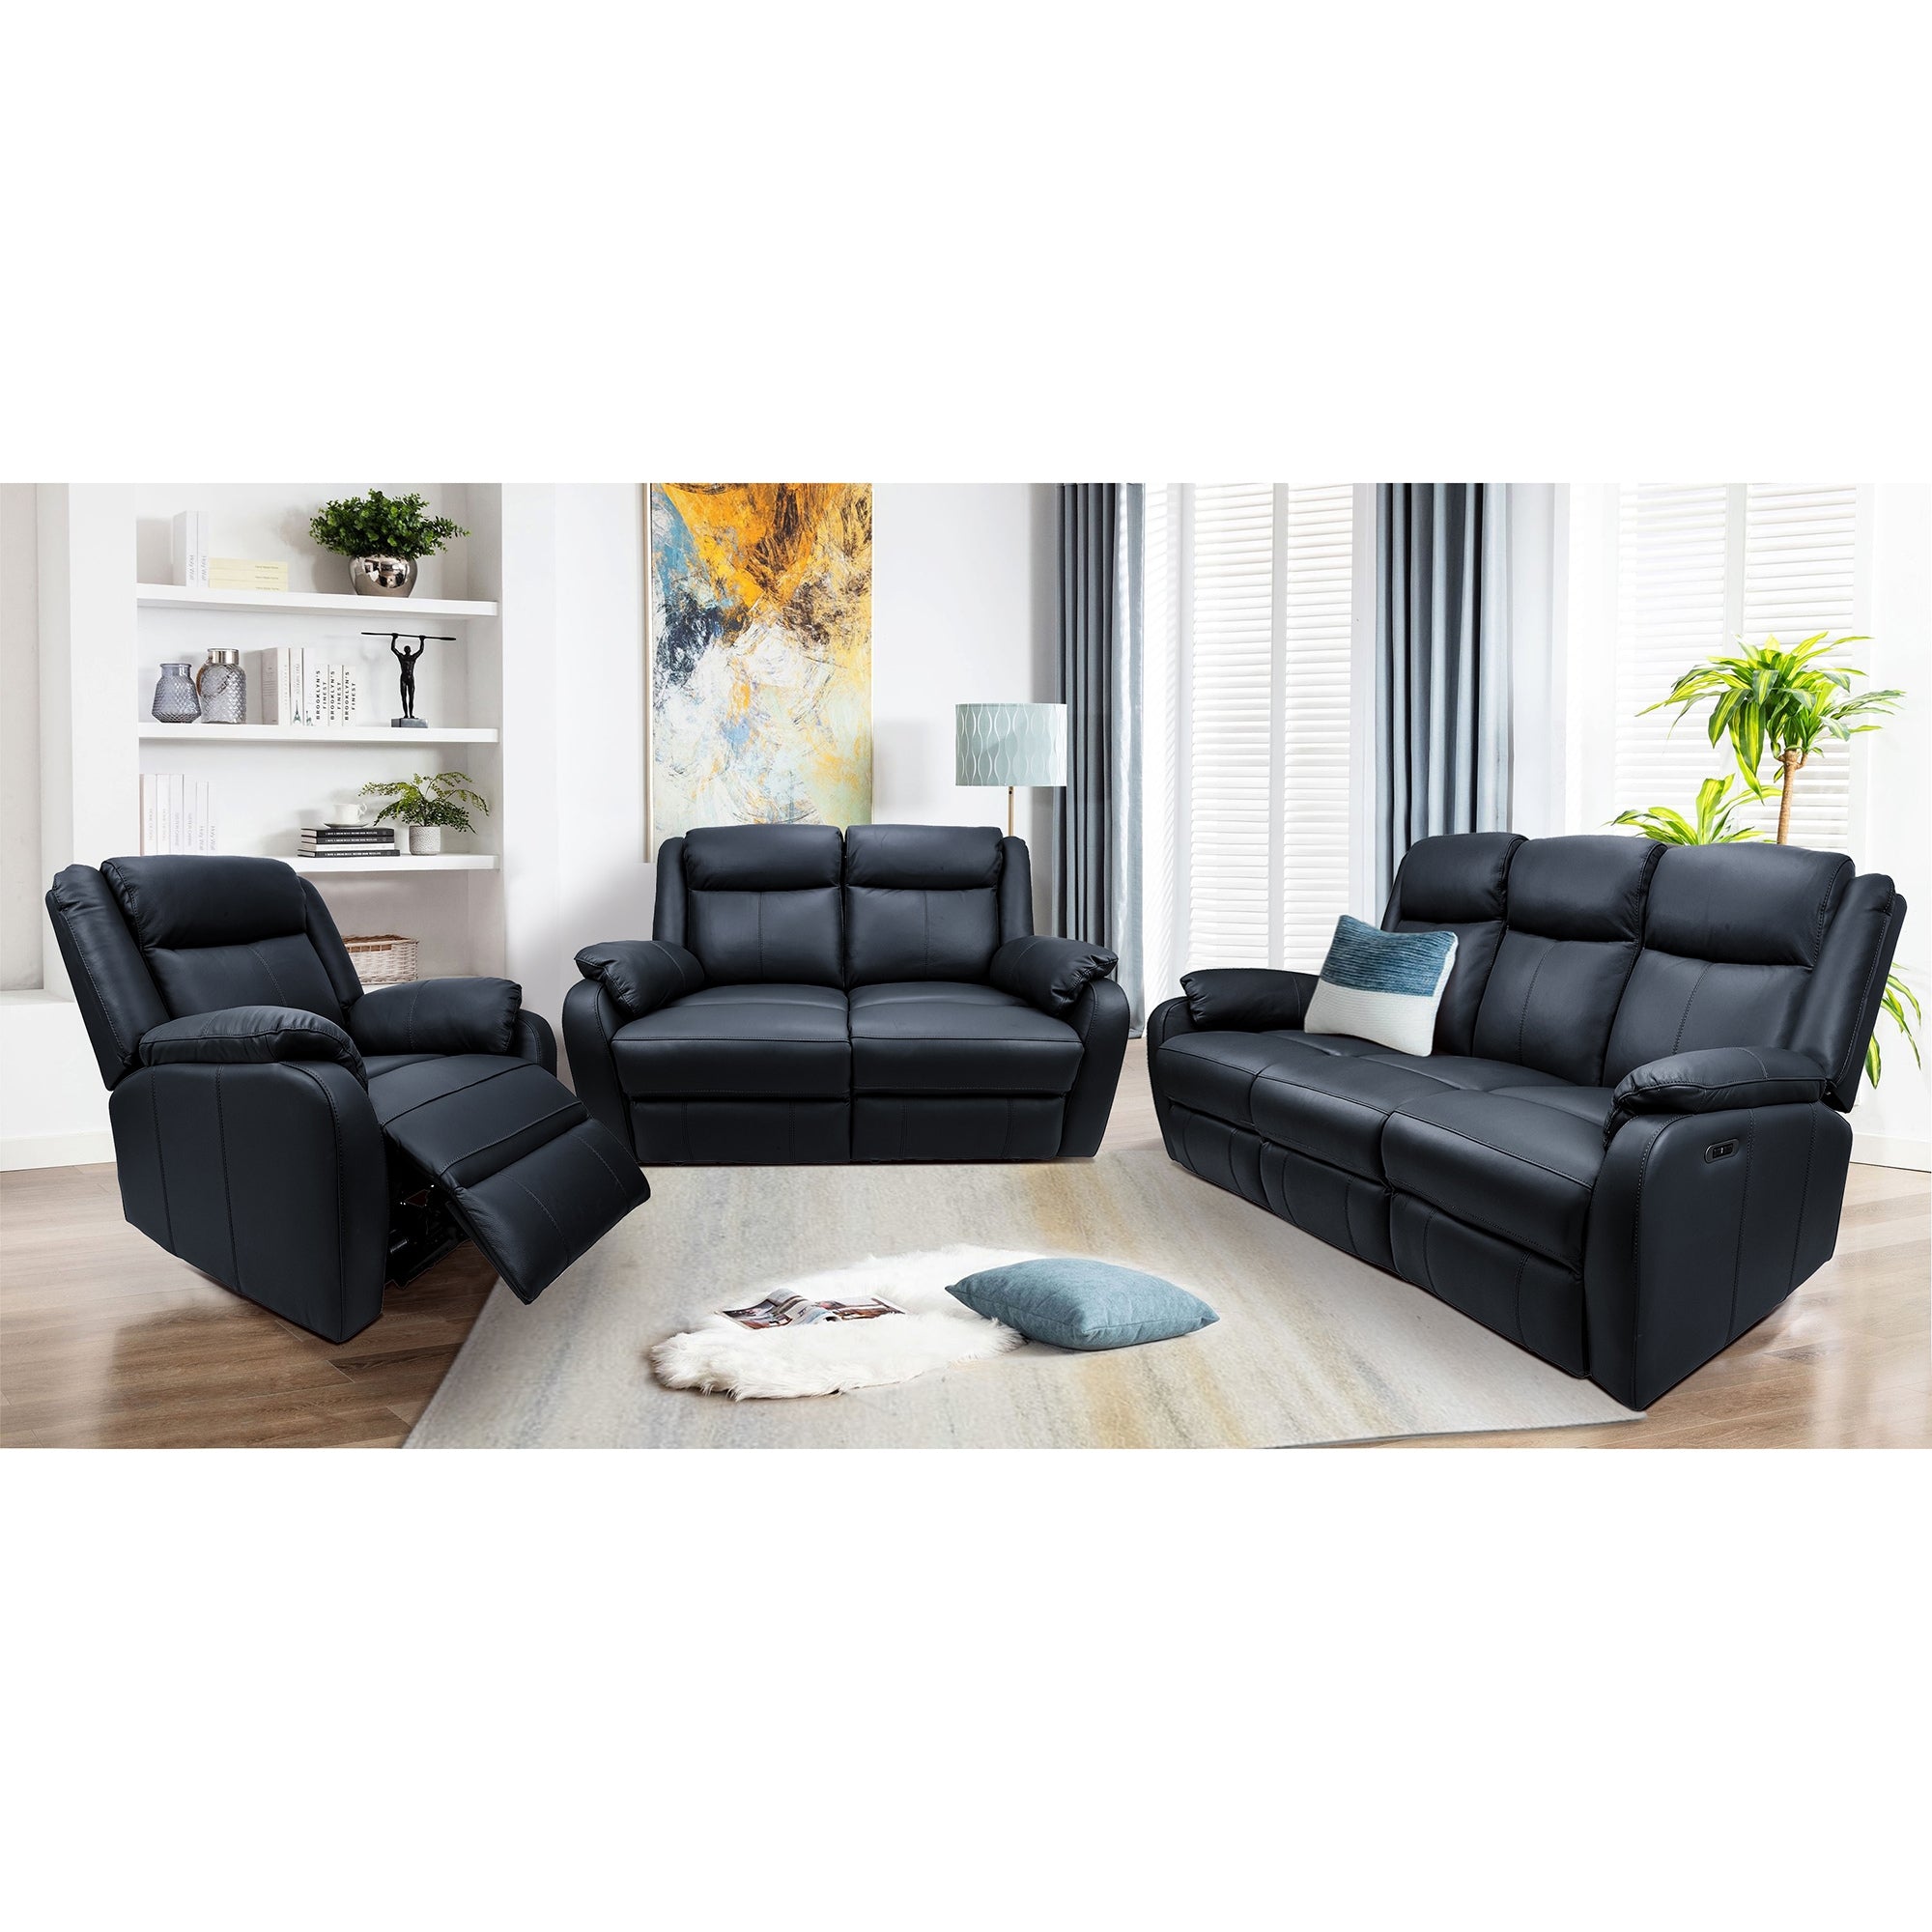 Bella 1 Seater Electric Recliner Genuine Leather Upholstered Lounge - Black